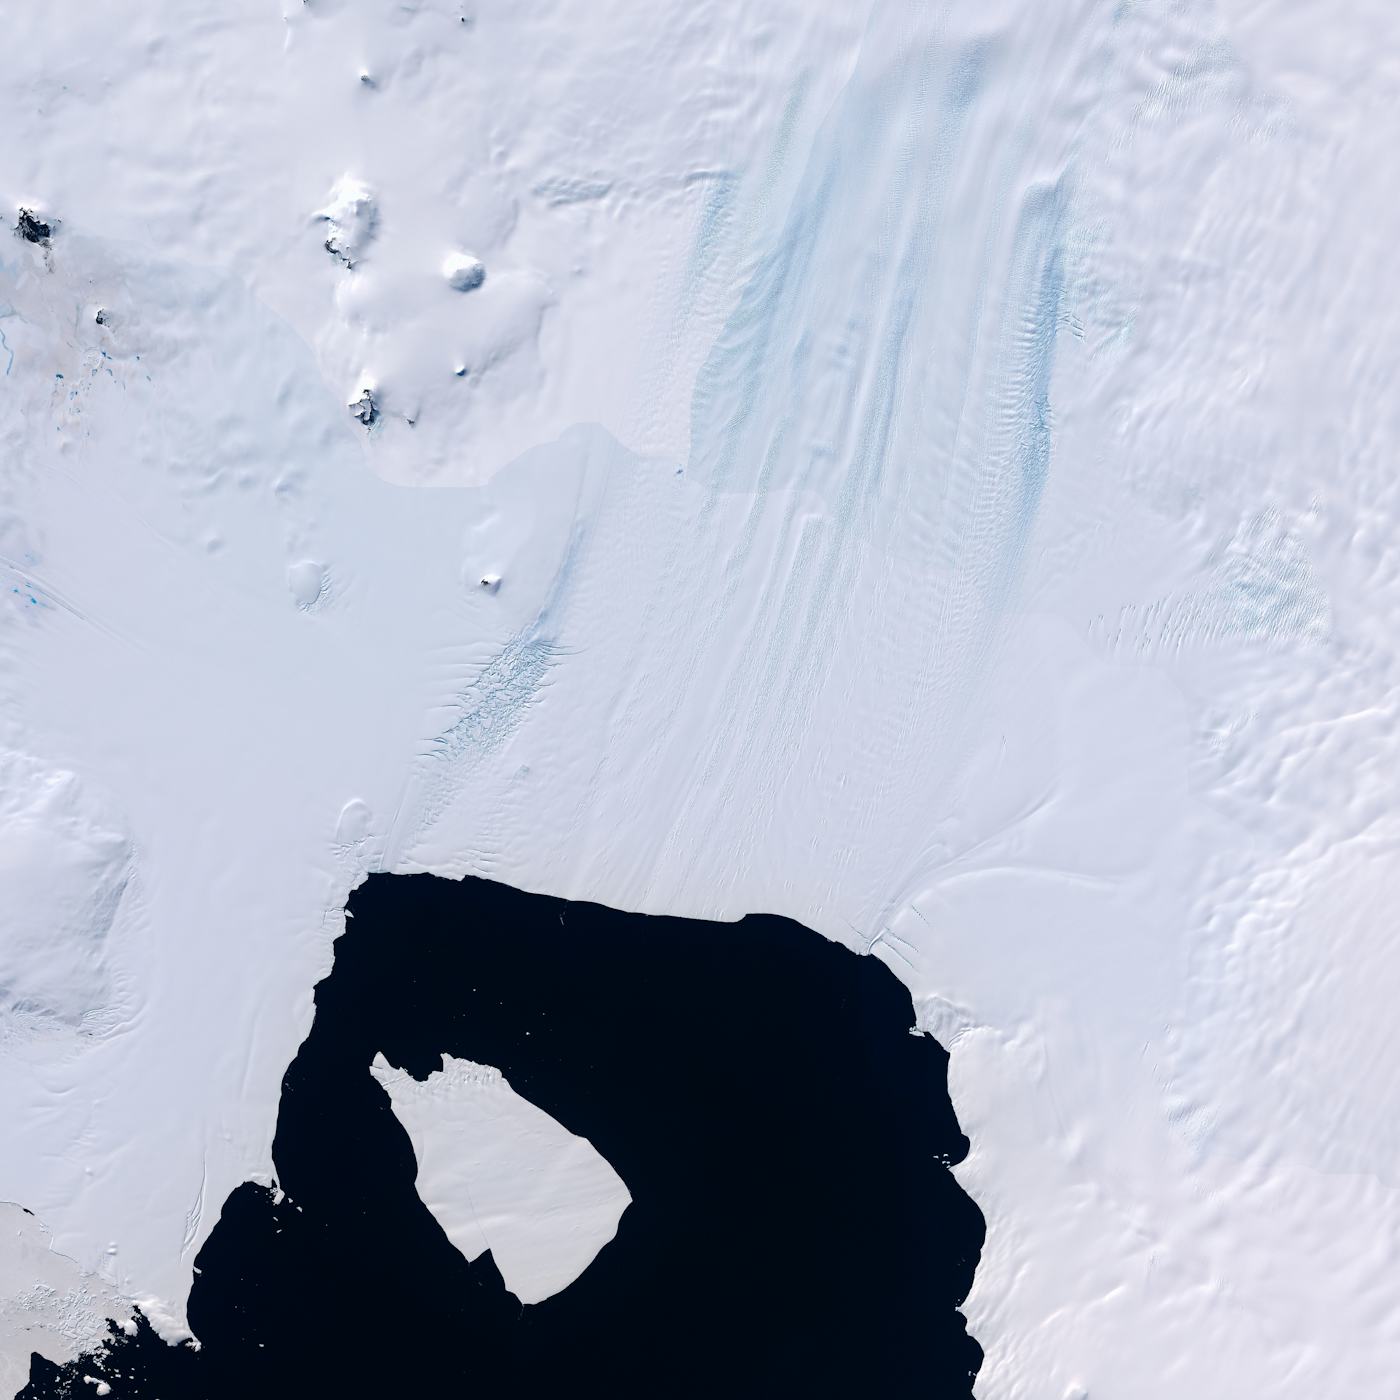 Satellite view of an icy landscape showing dark open water surrounded by white snow with distinct textures.